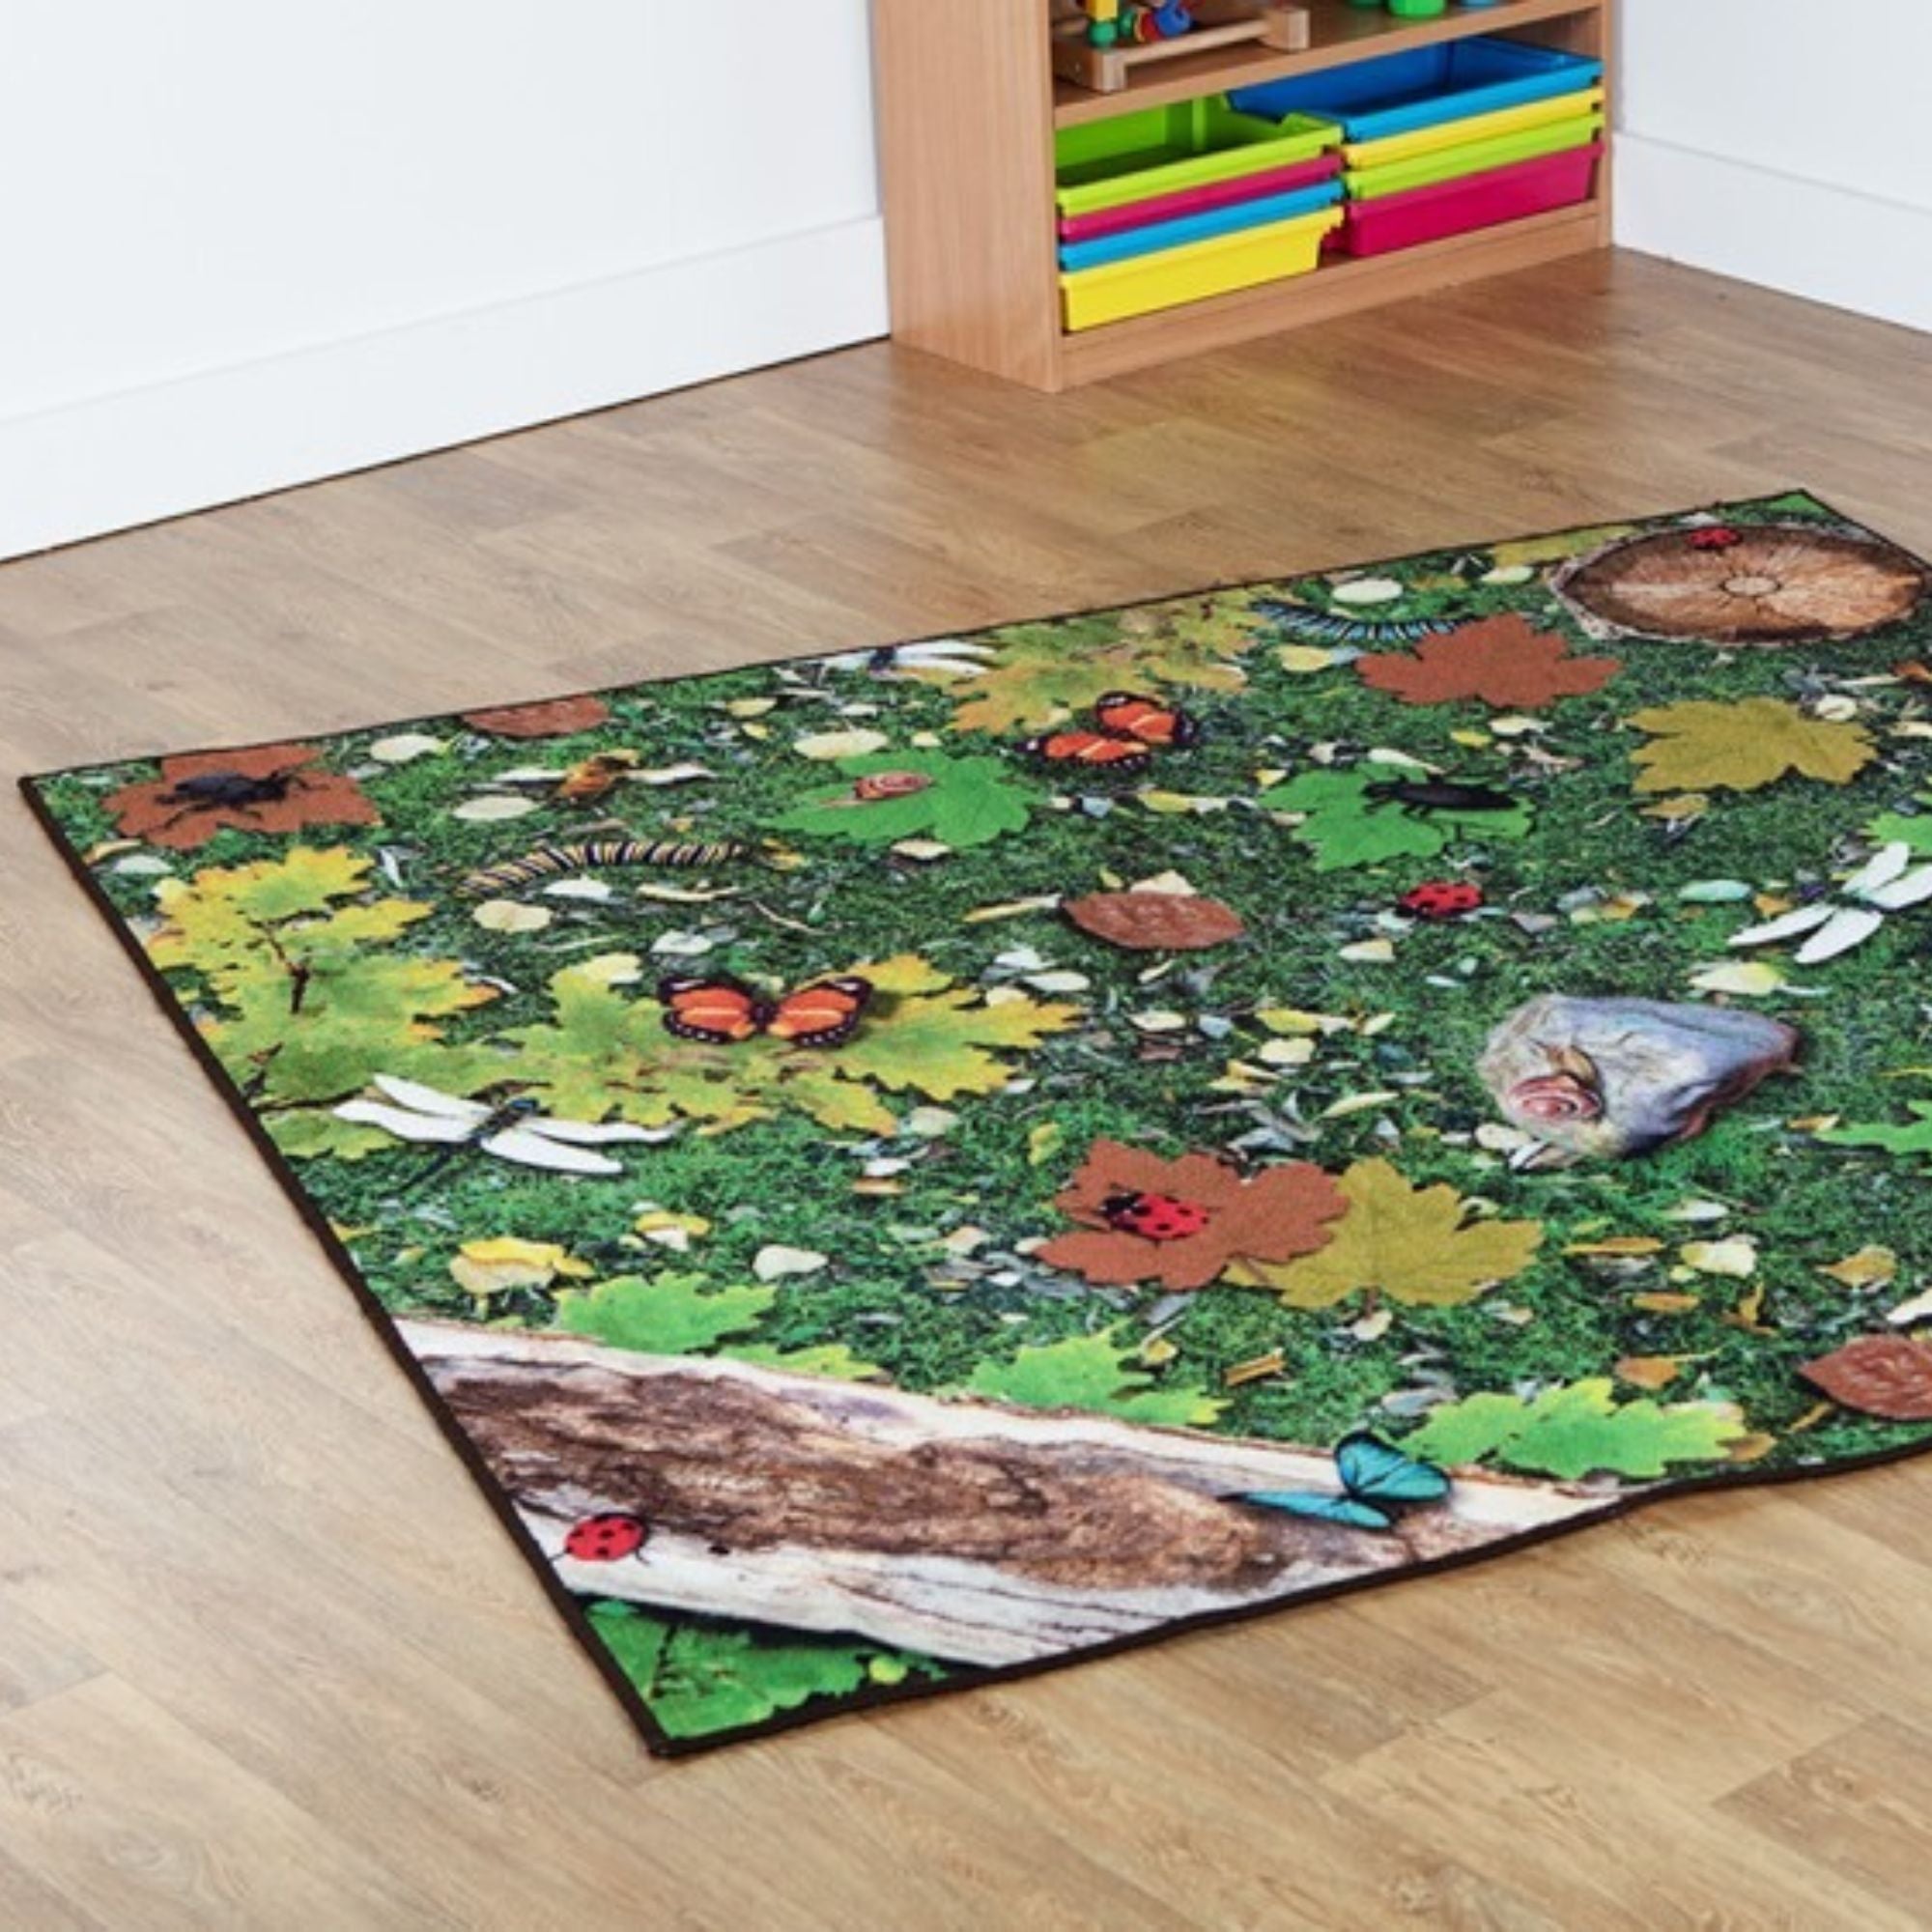 Natural World Woodland and Minibeasts Double Sided Carpet, An innovative woodland range with realistic designs to fire curiosity and imagination and bring the outdoors in to the classroom environment. The Woodland Double Sided Classroom Carpet brings the beauty of the outdoors inside,making this a delightful addition to any classroom or early years setting. Superb value is also at the heart of the Woodland Double Sided Classroom Carpet as its double sided so you have twice as much decorative joy at the hear